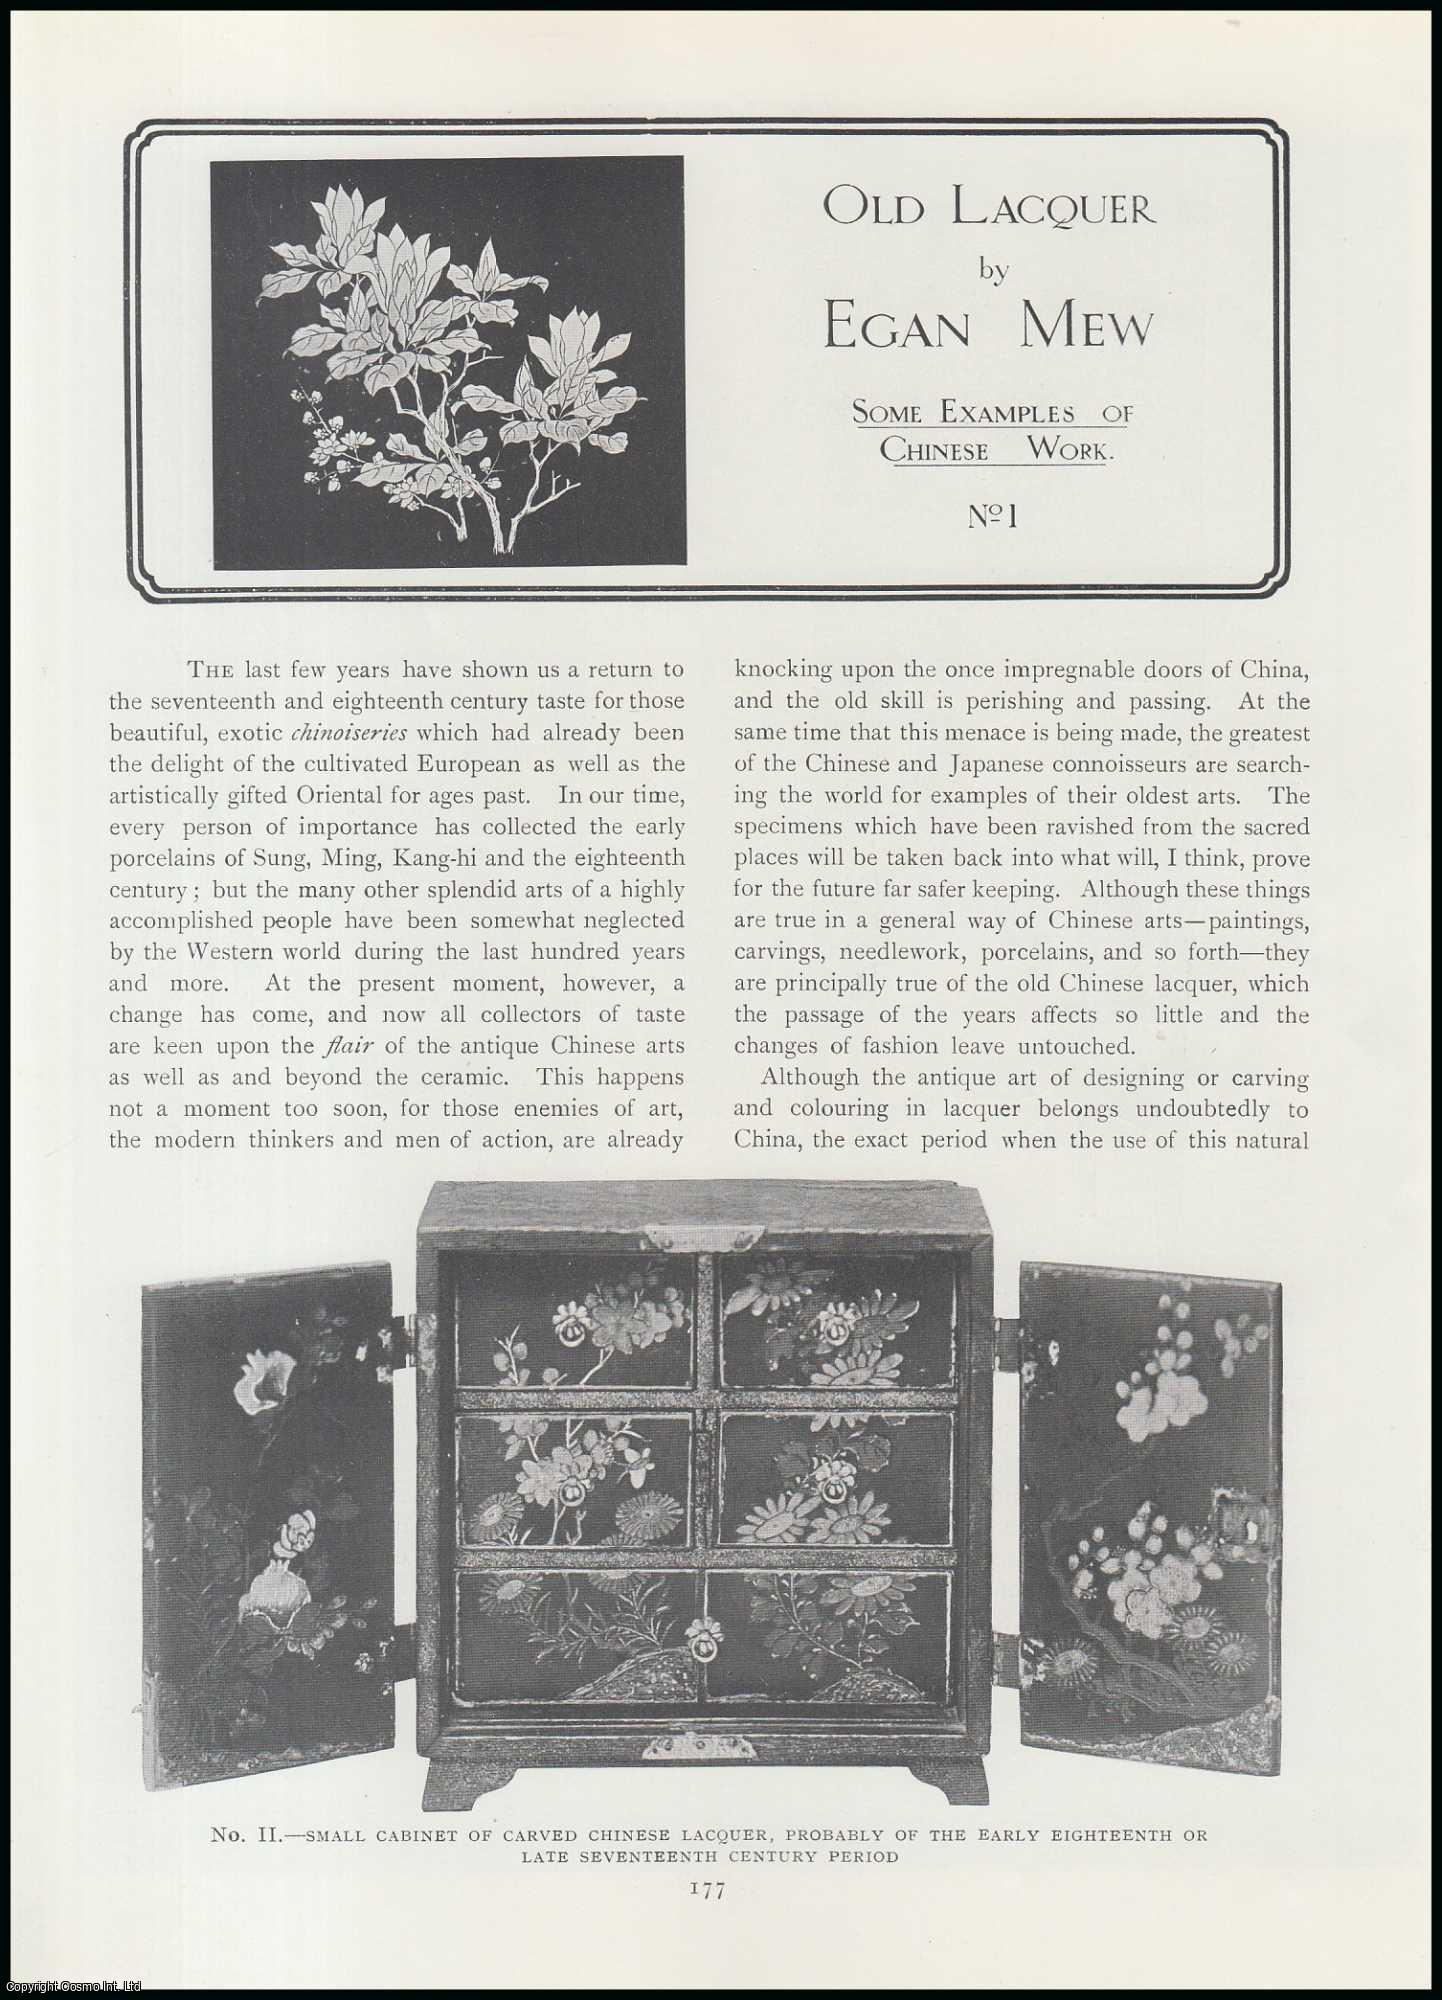 Egan Mew - Old Lacquer, Varnish : Some Examples of Chinese Work. An original article from The Connoisseur, 1912.